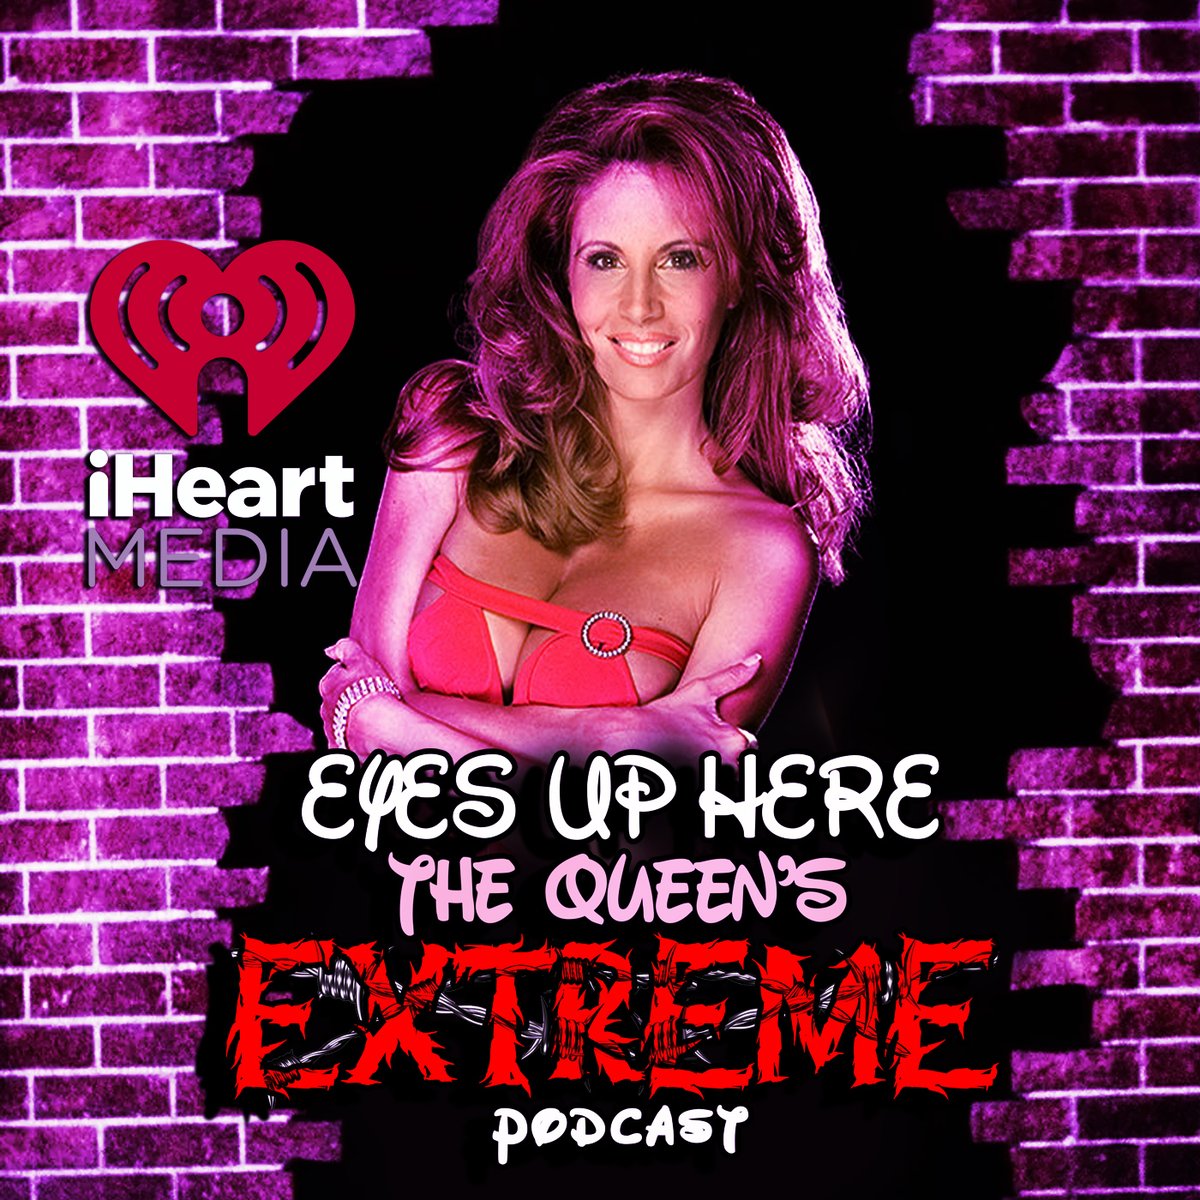 Start your Friday with TWO HUGE Eyes Up Here with @ECWDivaFrancine episodes on @iHeartRadio or wherever you get your podcasts. Vince's McMania: The Scandals that HAUNT the WWE: iheart.com/podcast/1119-e… Francine's WrestleMania weekend recap: iheart.com/podcast/1119-e…